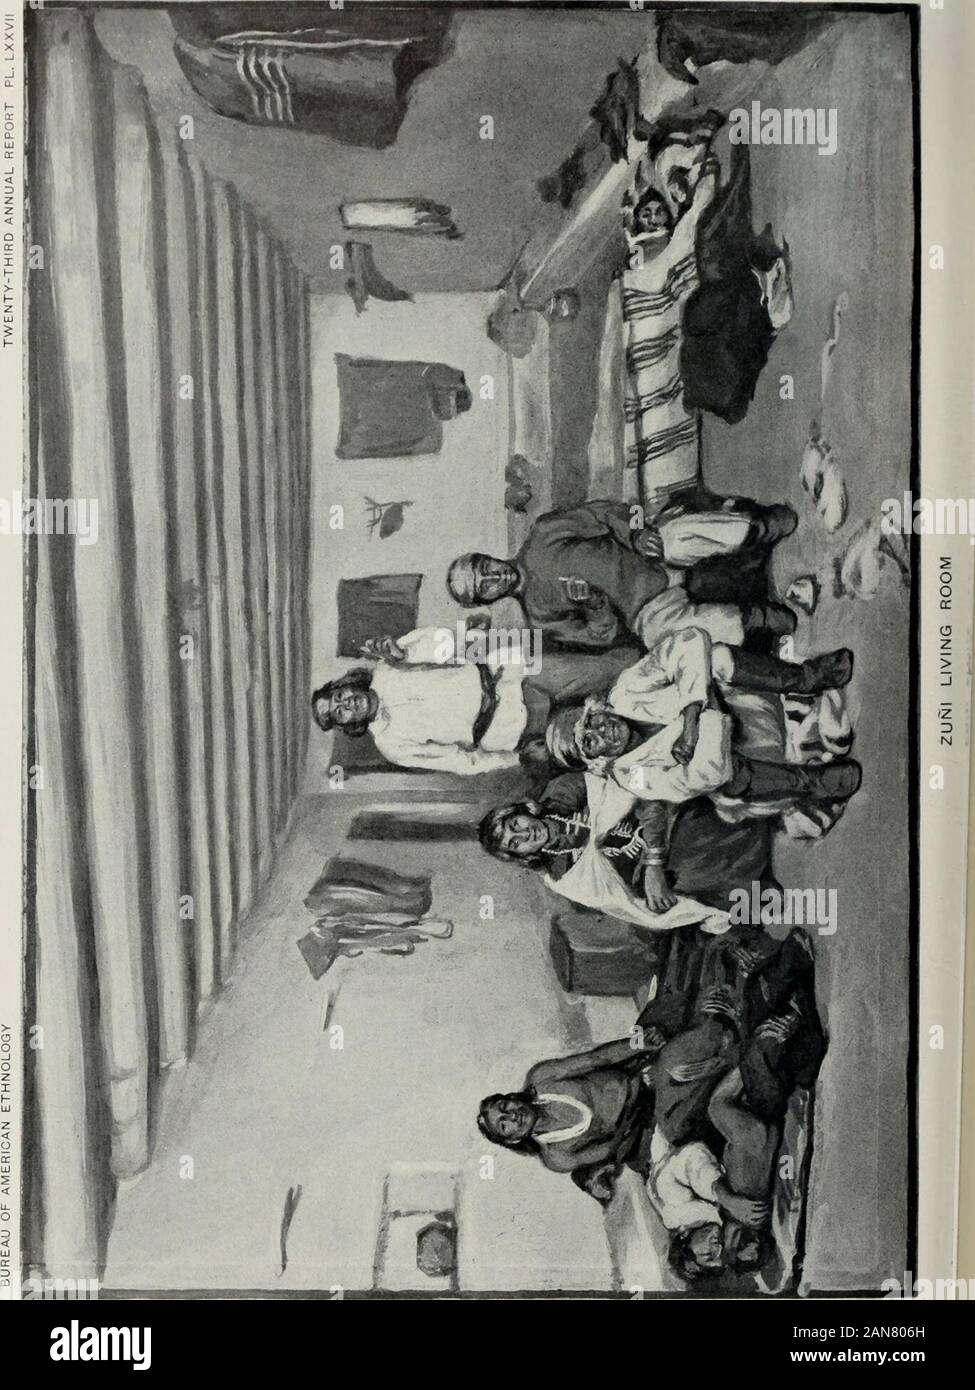 Annual report of the Bureau of ethnology to the secretary of the Smithsonian Institution .. . ats, and sleeps, and where guests are entertained. When theroom is required for the use of some fraternity, the family adjournsto other quarters, moving all its belongings. In this room the familywardrobe hangs on a pole suspended from the rafters. The more val-uable things, especially the ceremonial paraphernalia, are carefullywrapped and deposited in the storage rooms. As a rule the mills forgrinding meal are set up in the general living room. They consist ofthree or more slabs of stone, of differen Stock Photo